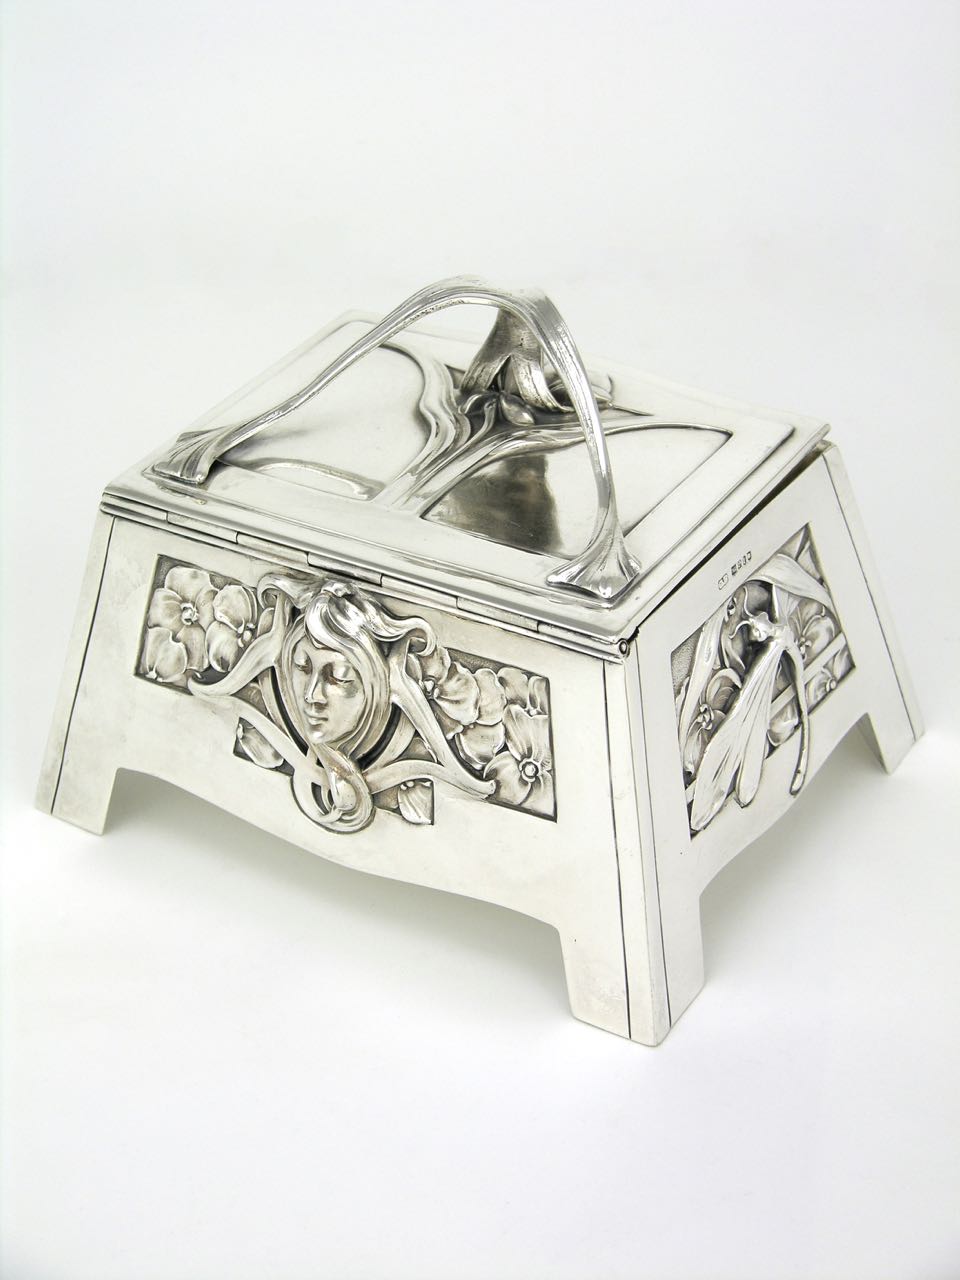 Antique Art Nouveau Solid Silver Sugar Box 1900 Germany - Carl Stock for Bruckmann and Söhne